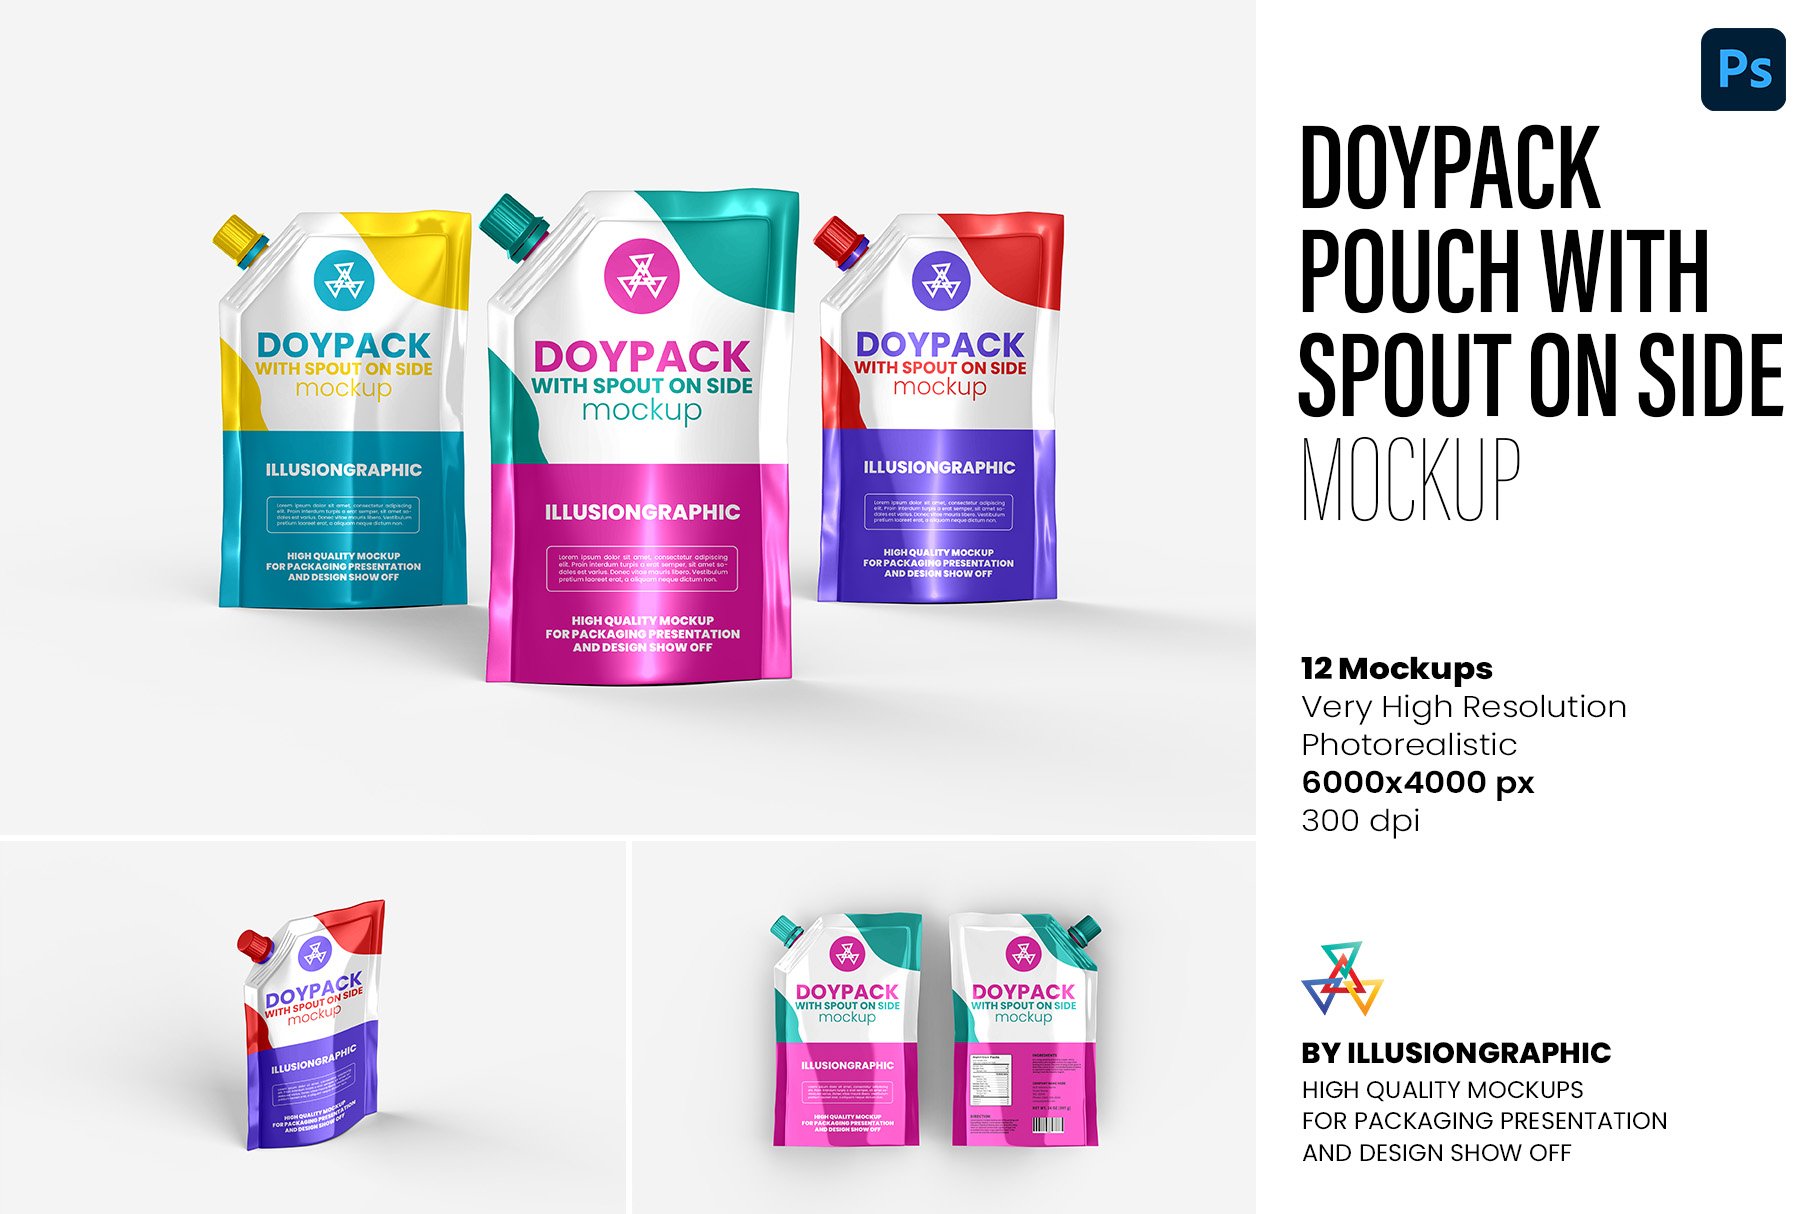 Doypack Pouch With Spout On Side Mockup - 12 Views - Design Cuts